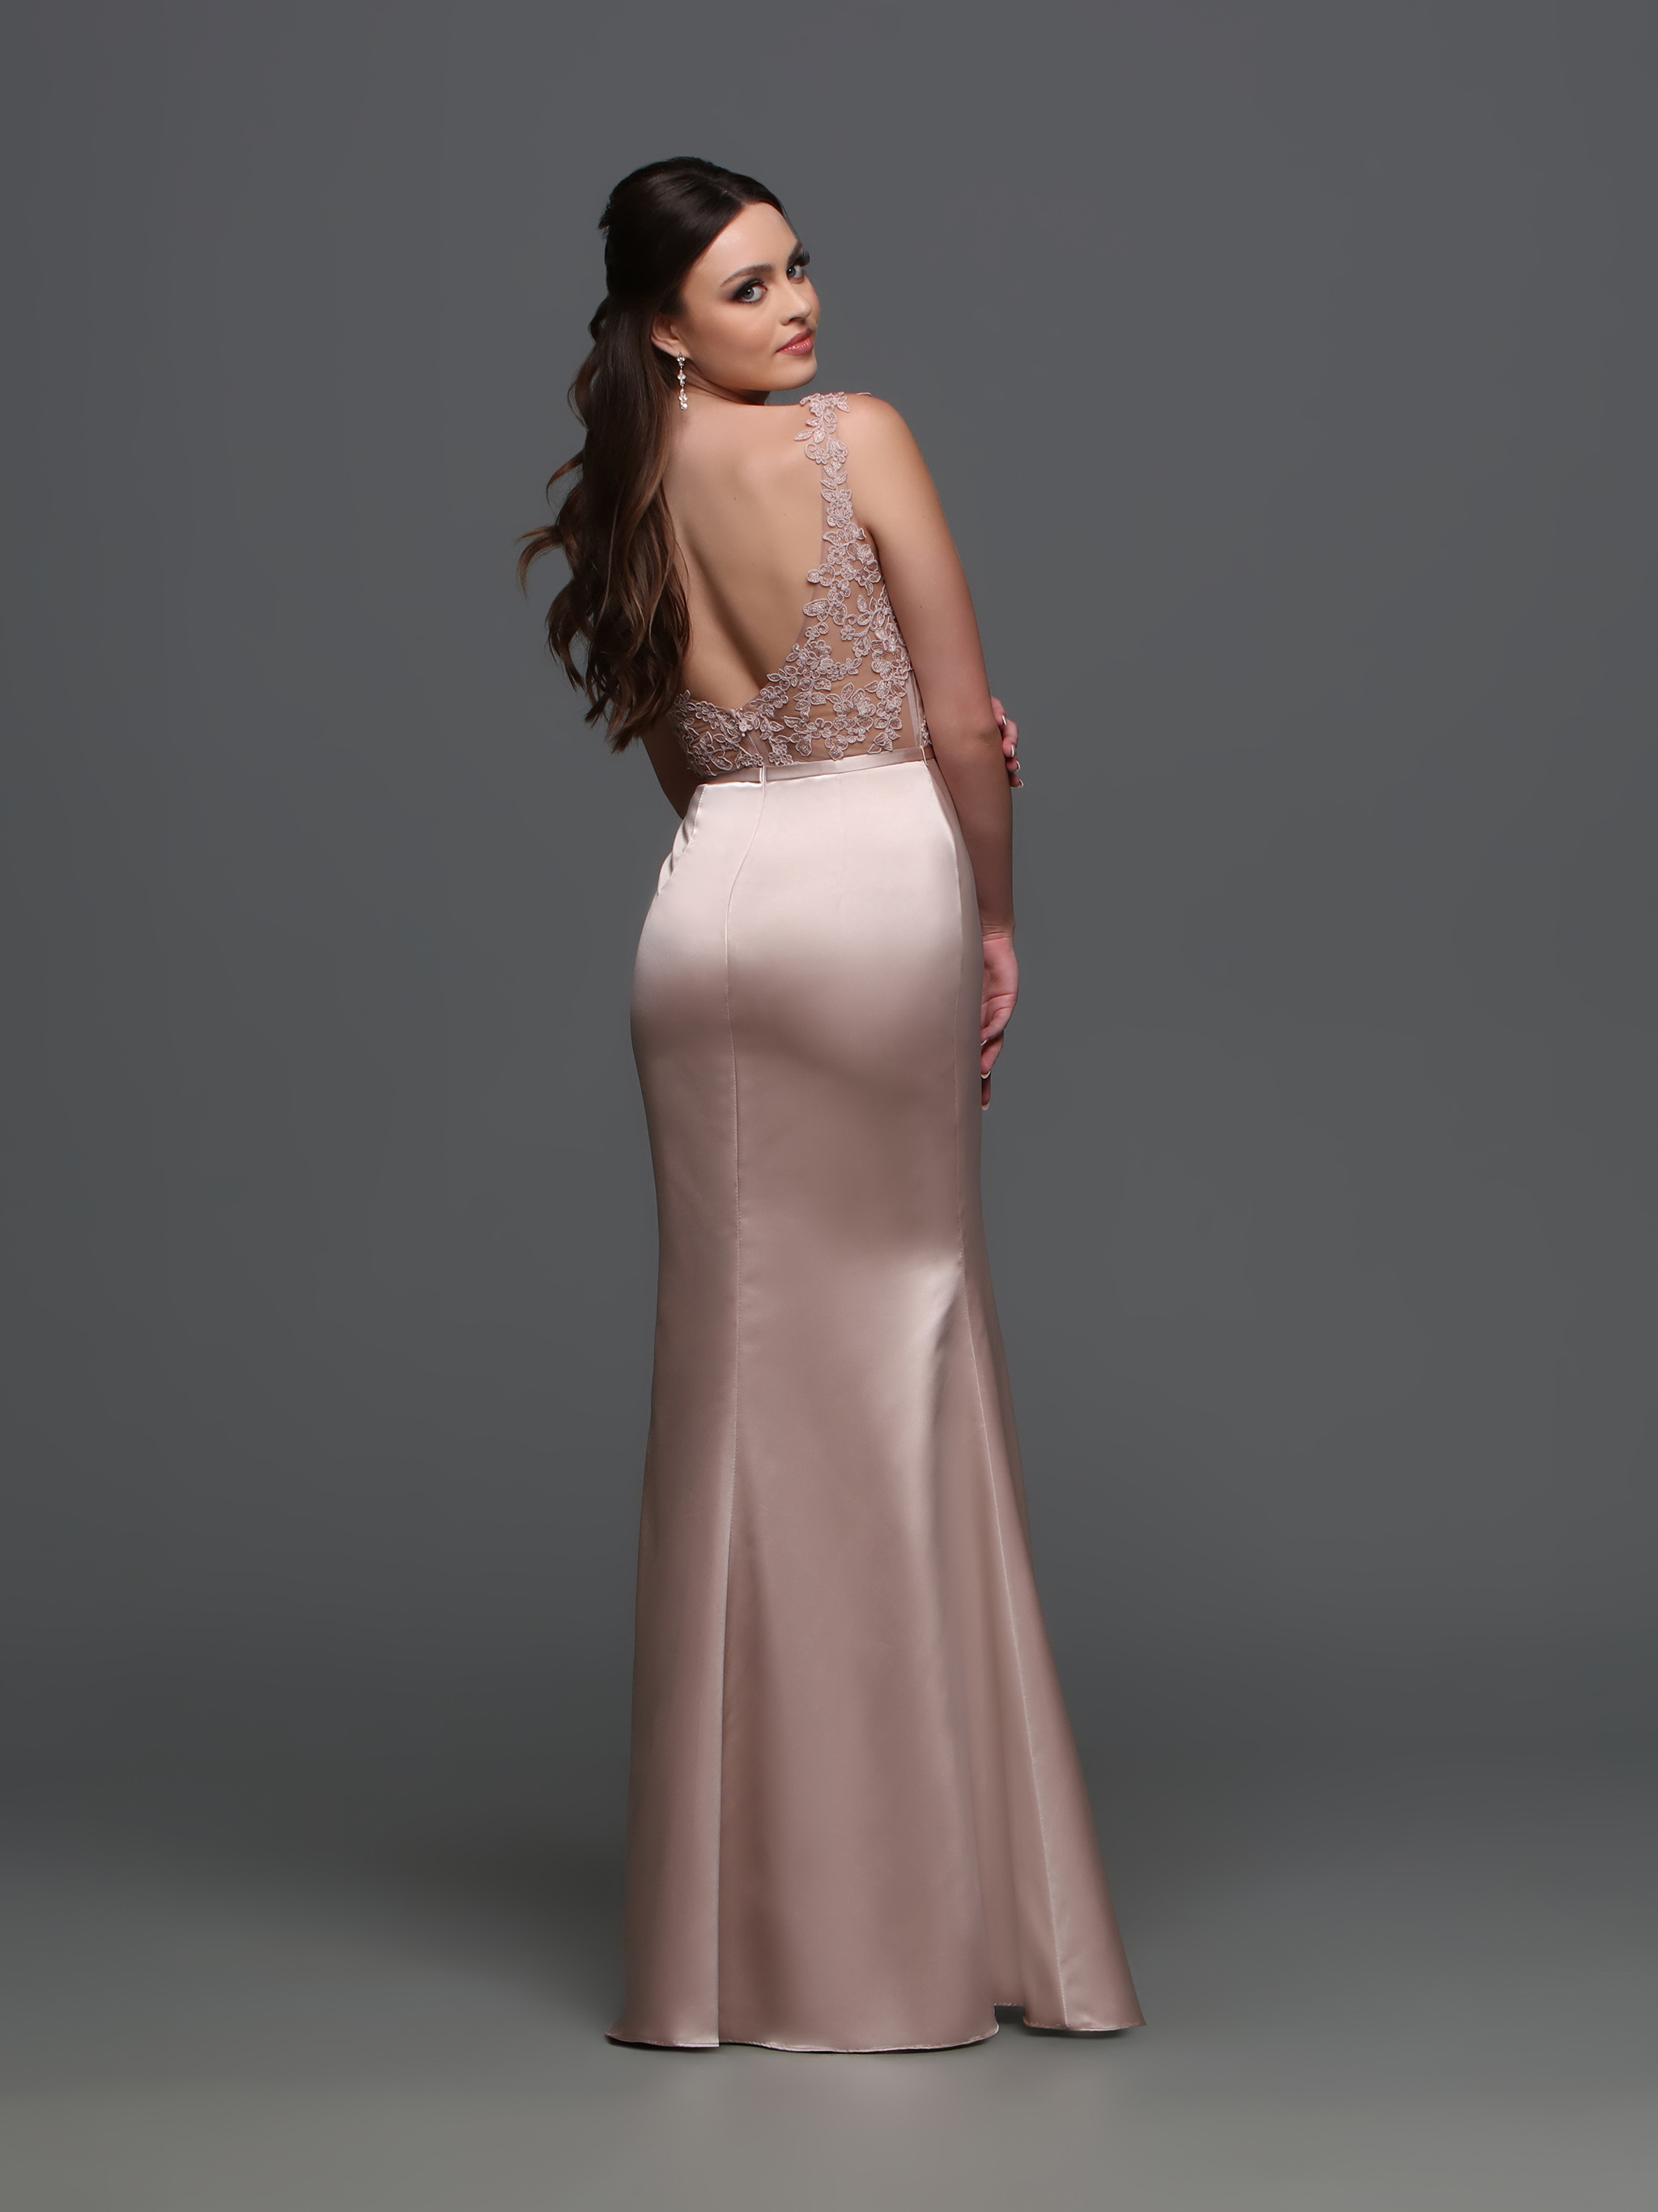 Image showing back view of style #60641